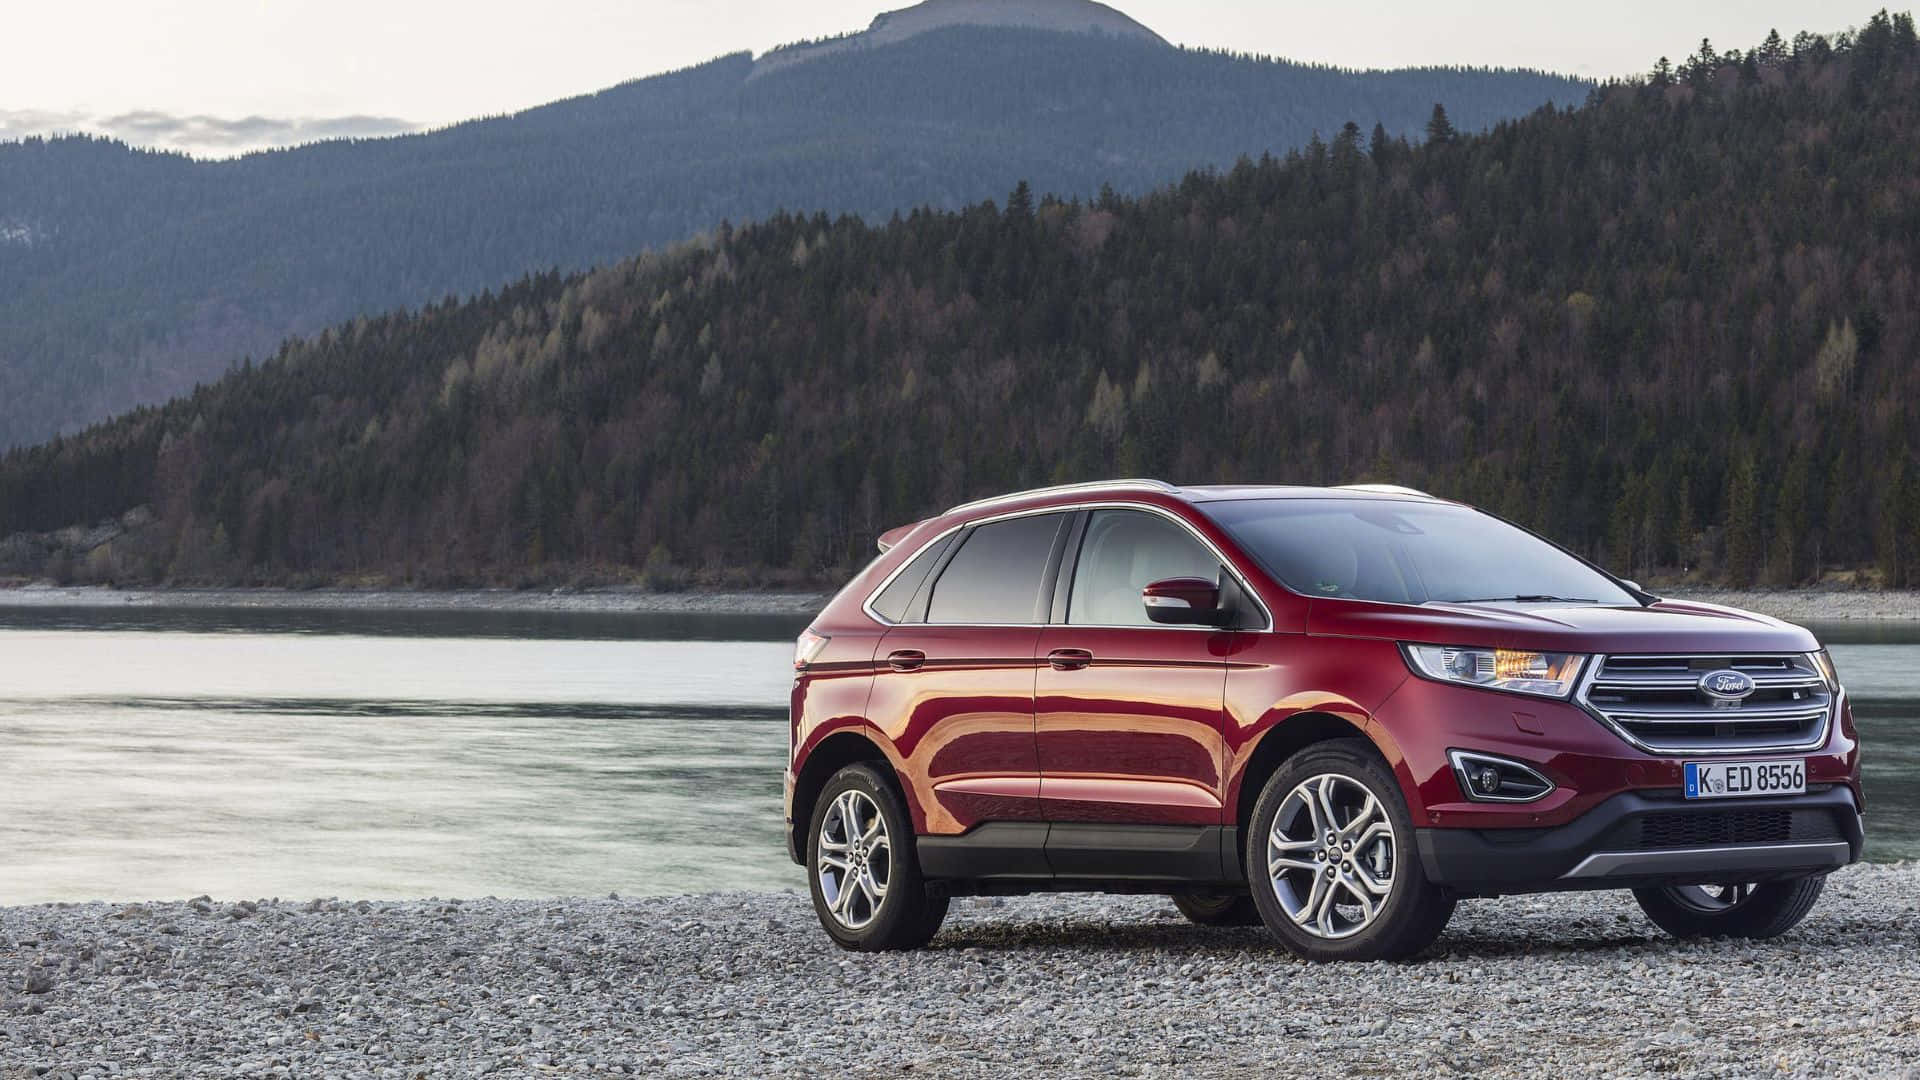 Stunning Ford Edge on the Road Wallpaper